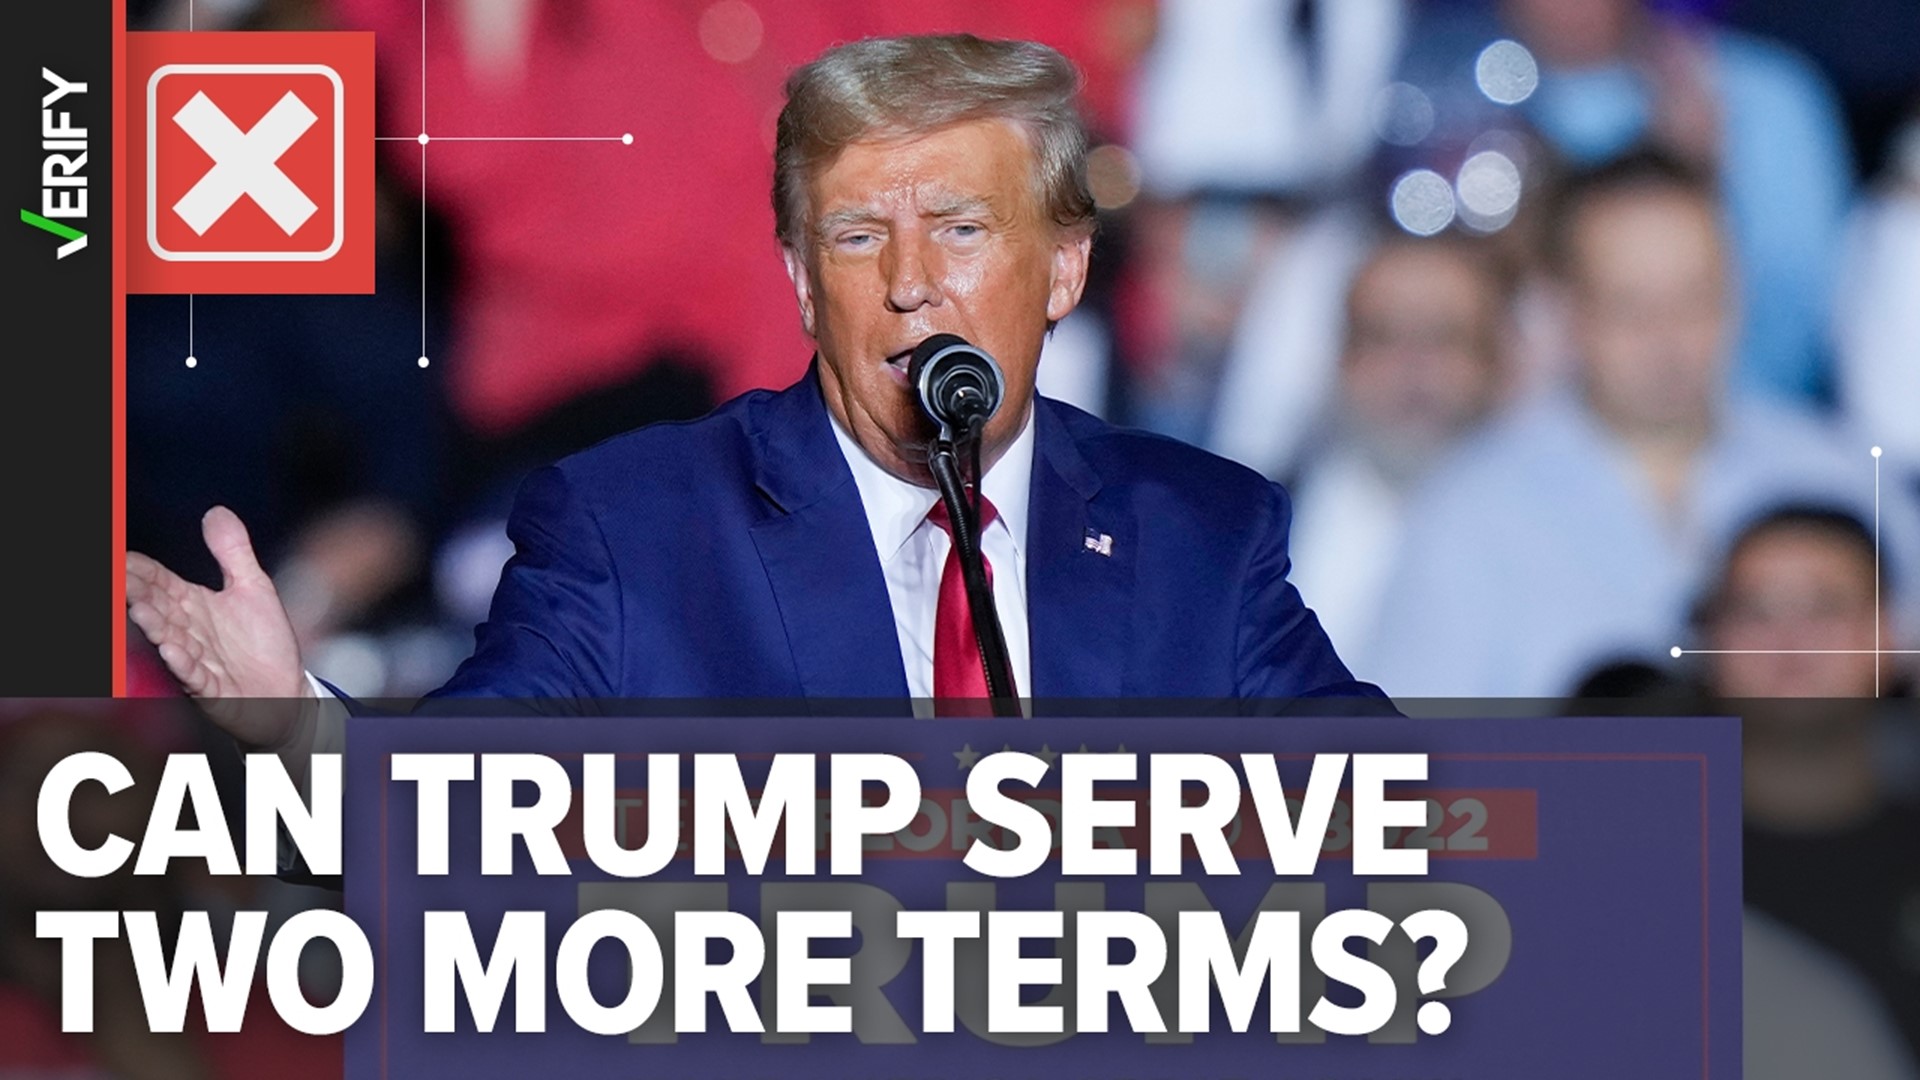 Several VERIFY readers asked if Trump can run for and serve two more terms if he is reelected as president in 2024. He can’t due to term limits in the Constitution.